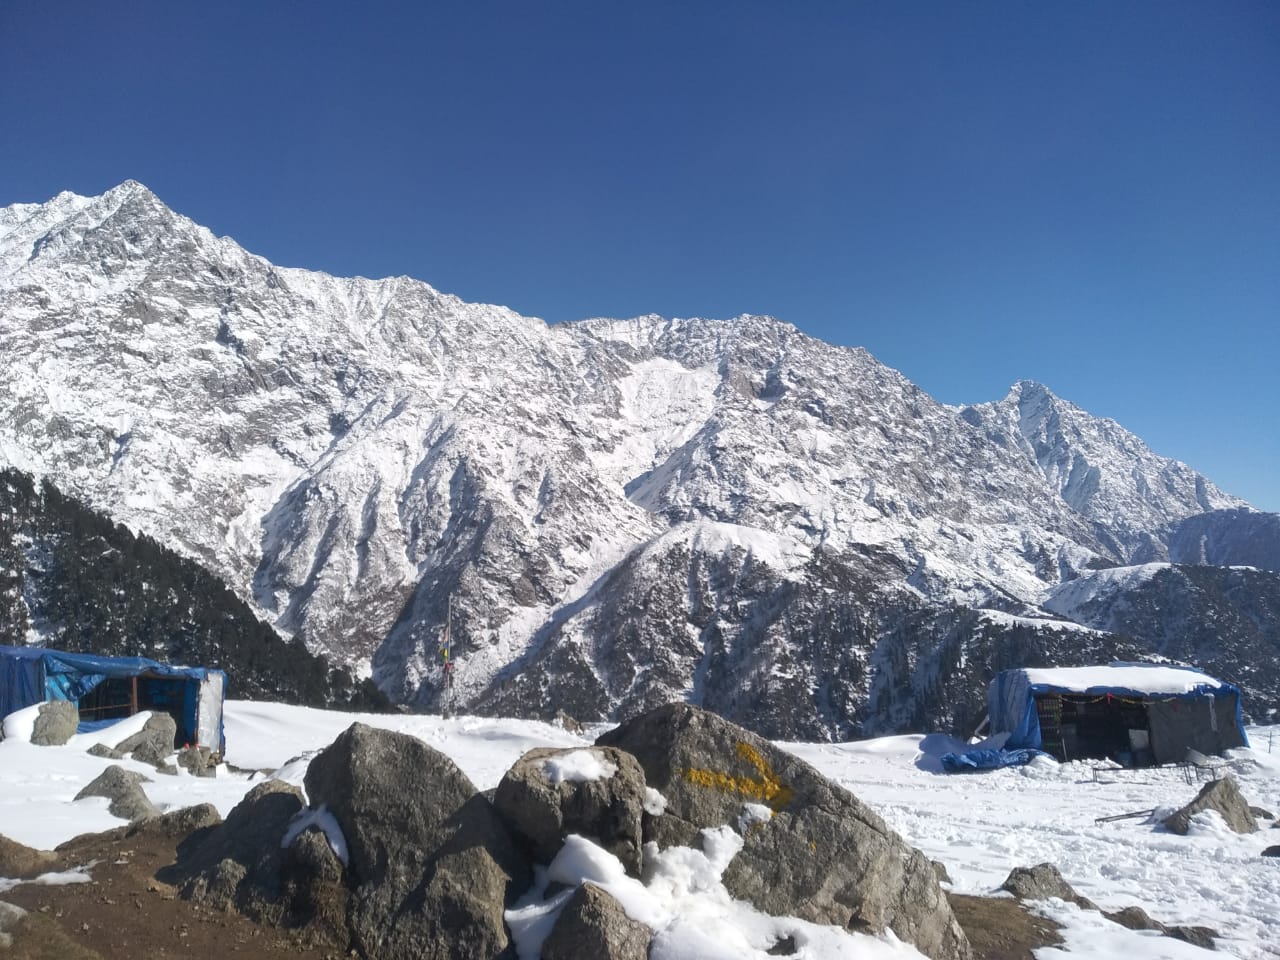 Day hike to Triund